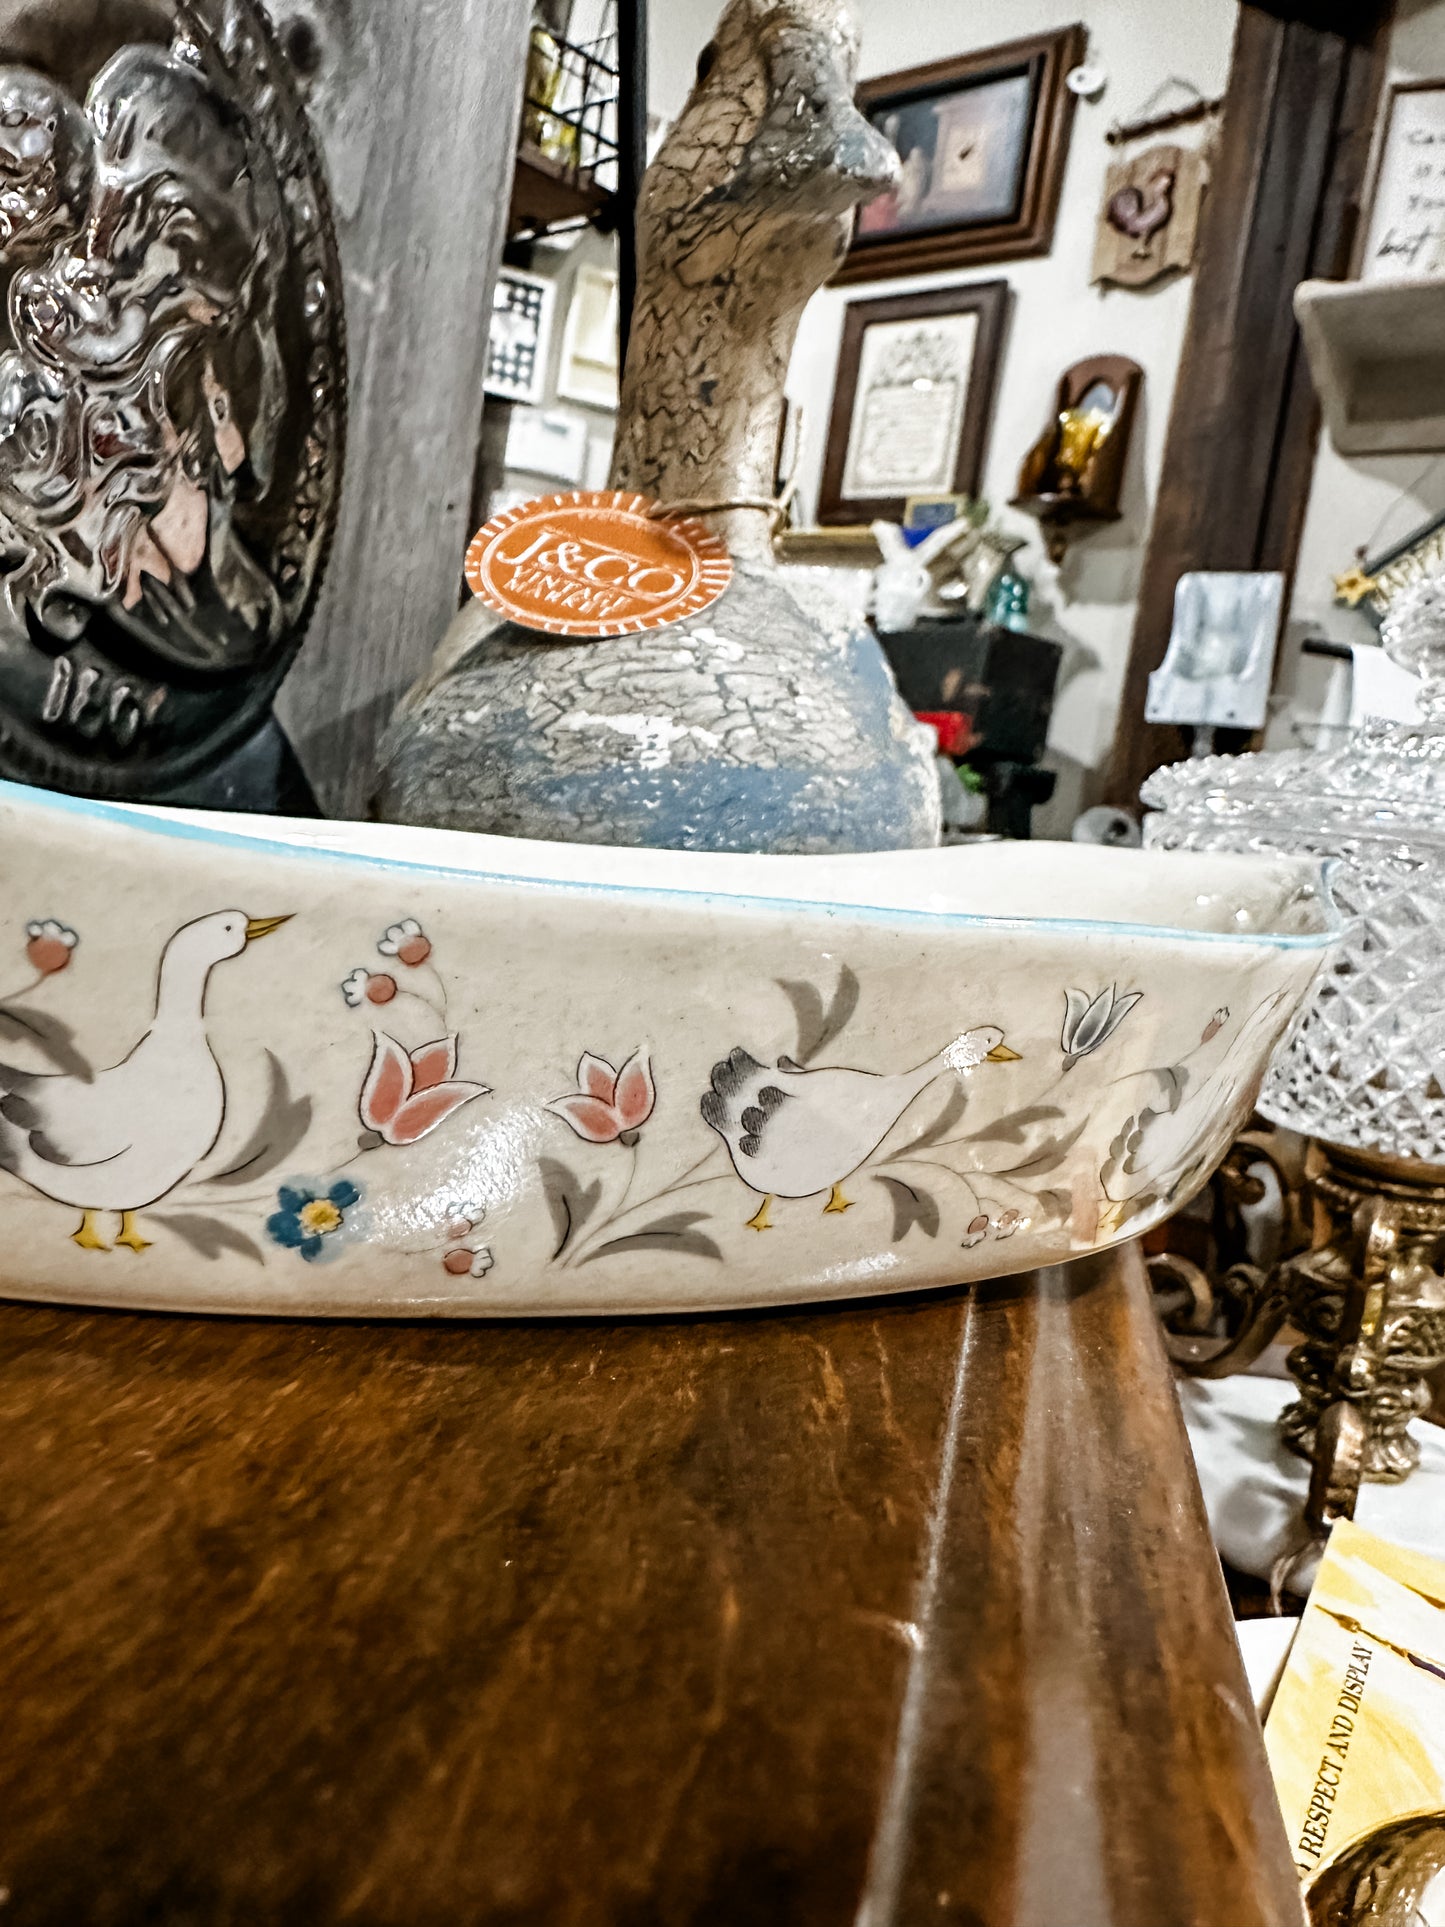 Vintage Stained/Crazed Duck Casserole Dish